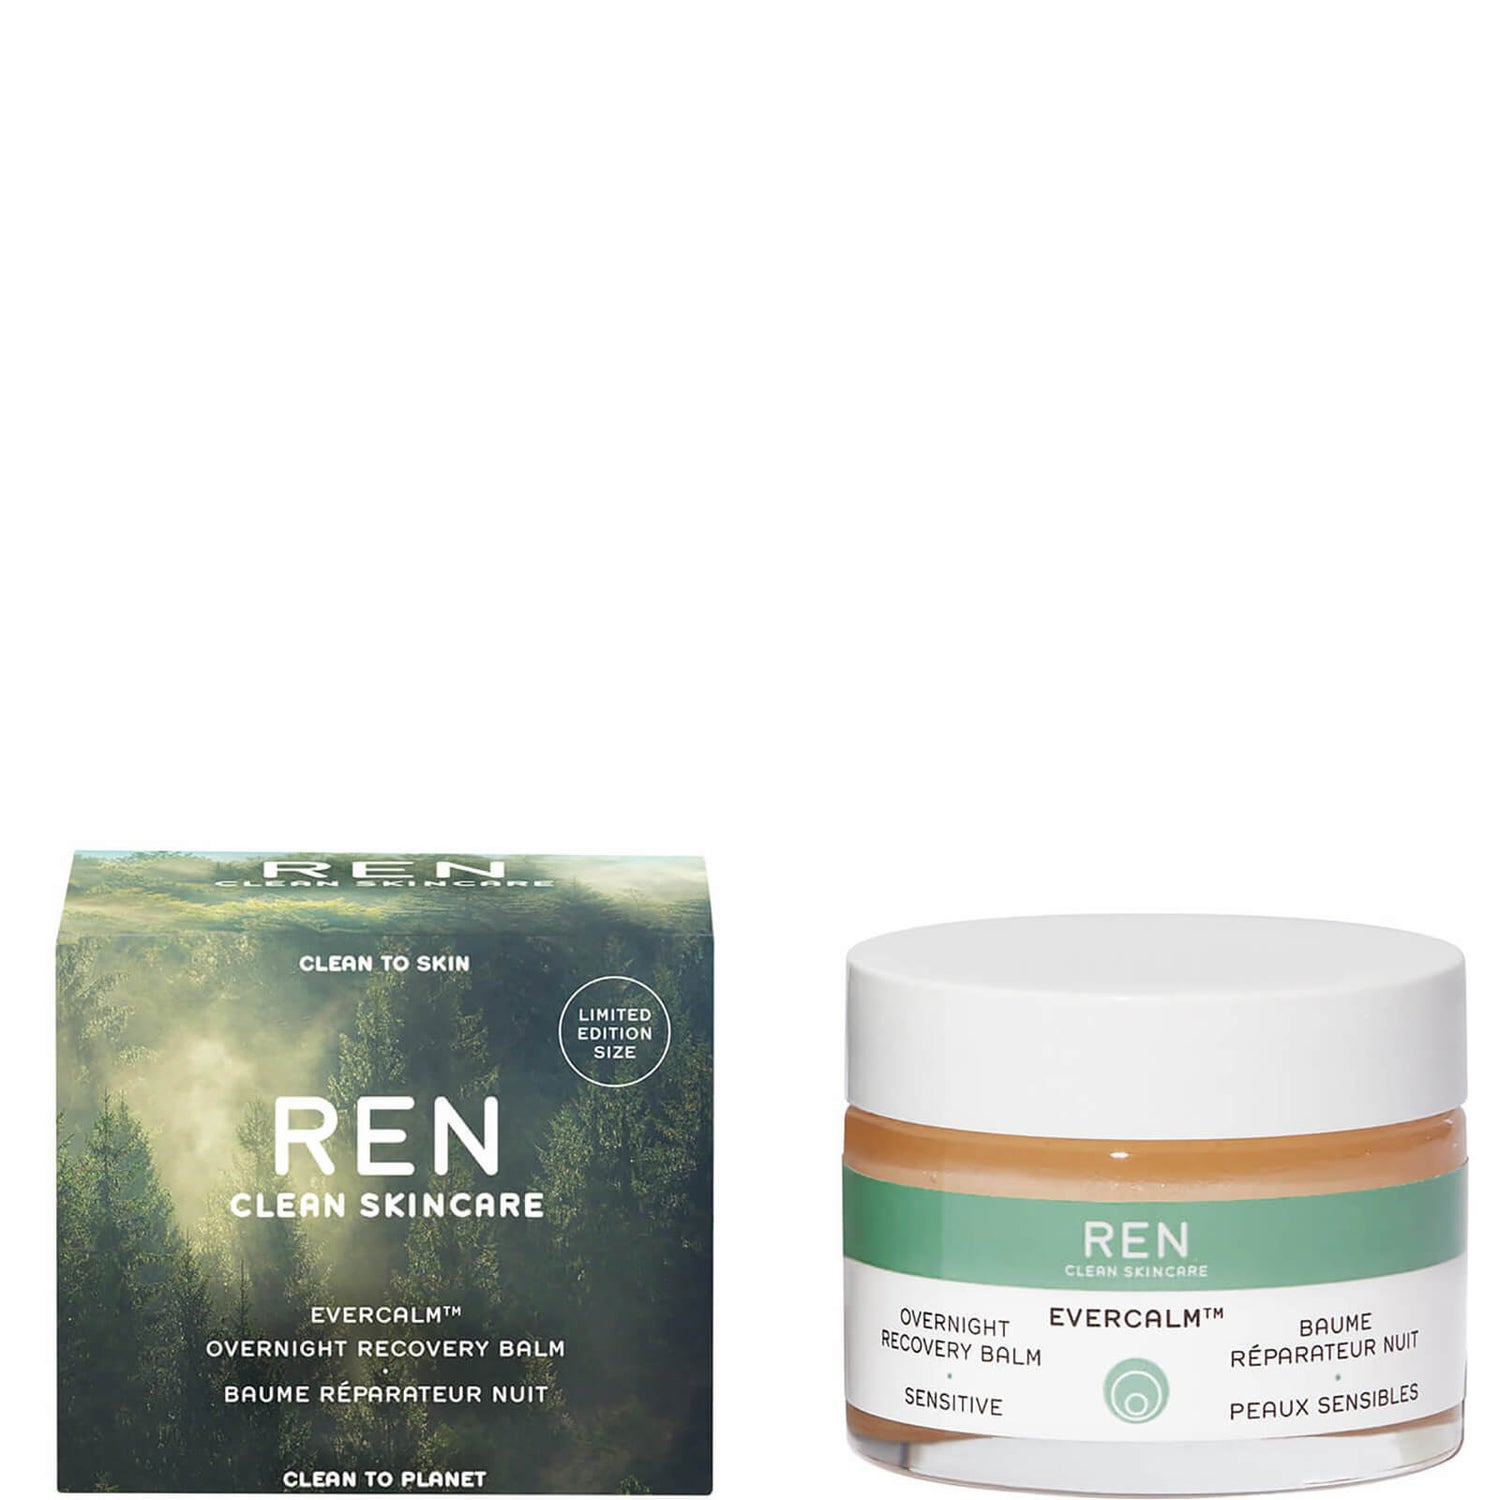 REN Clean Skincare Limited Edition Overnight Recovery Balm 50ml (Worth £70.00)